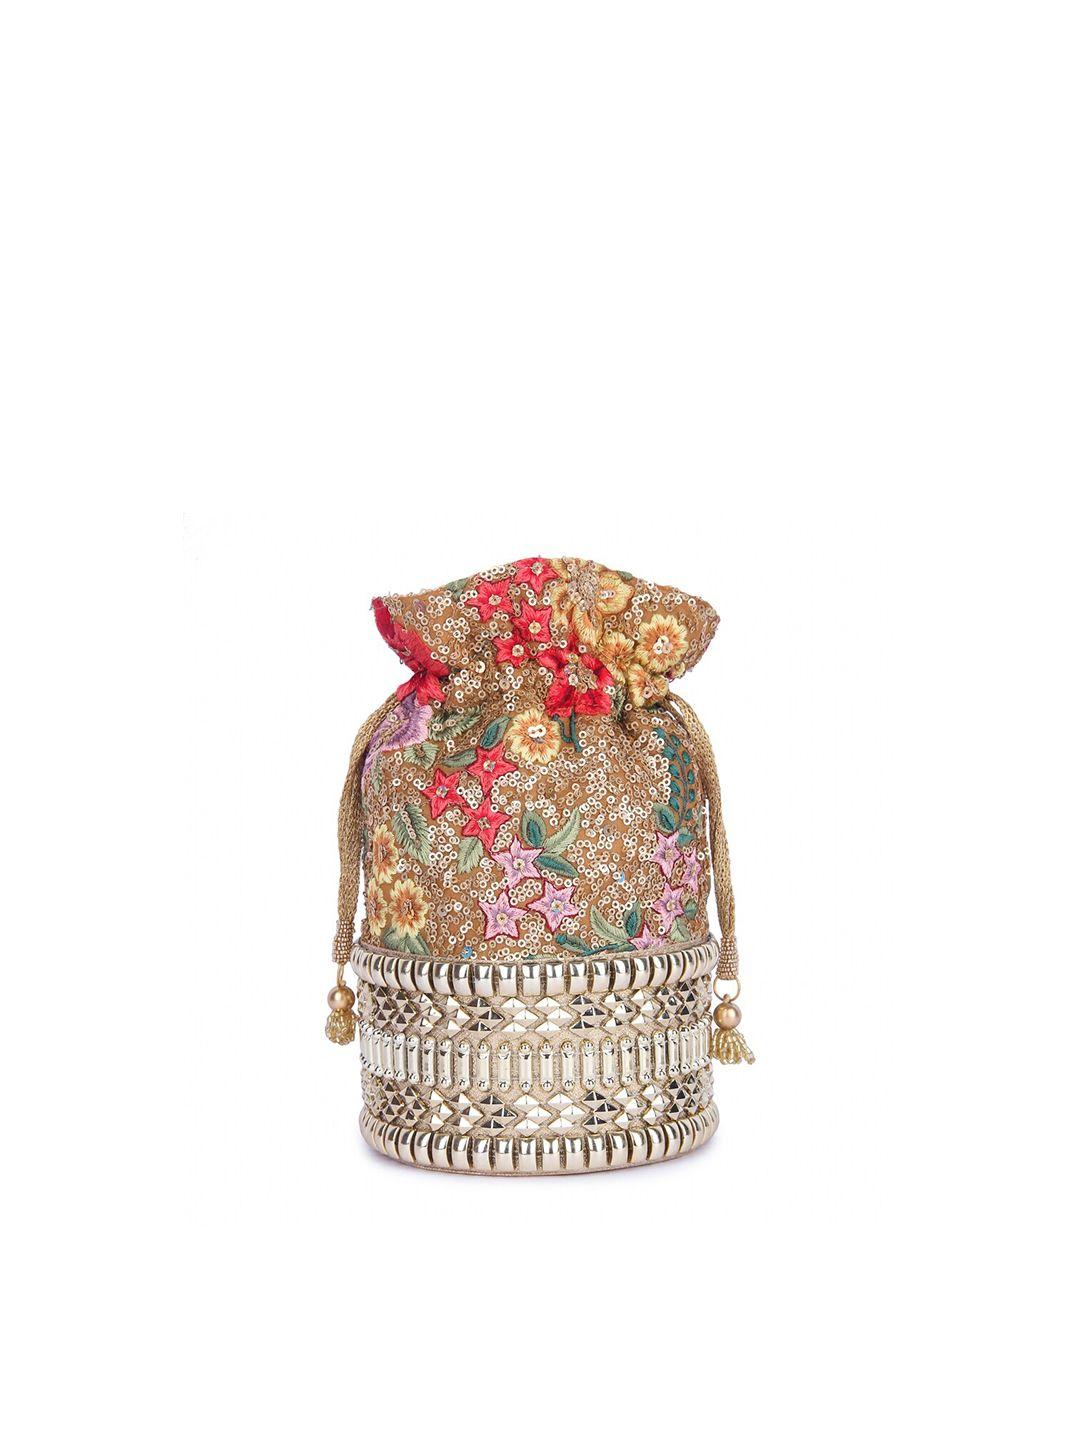 the-purple-sack-women-gold-toned-&-red-embroidered-potli-clutch